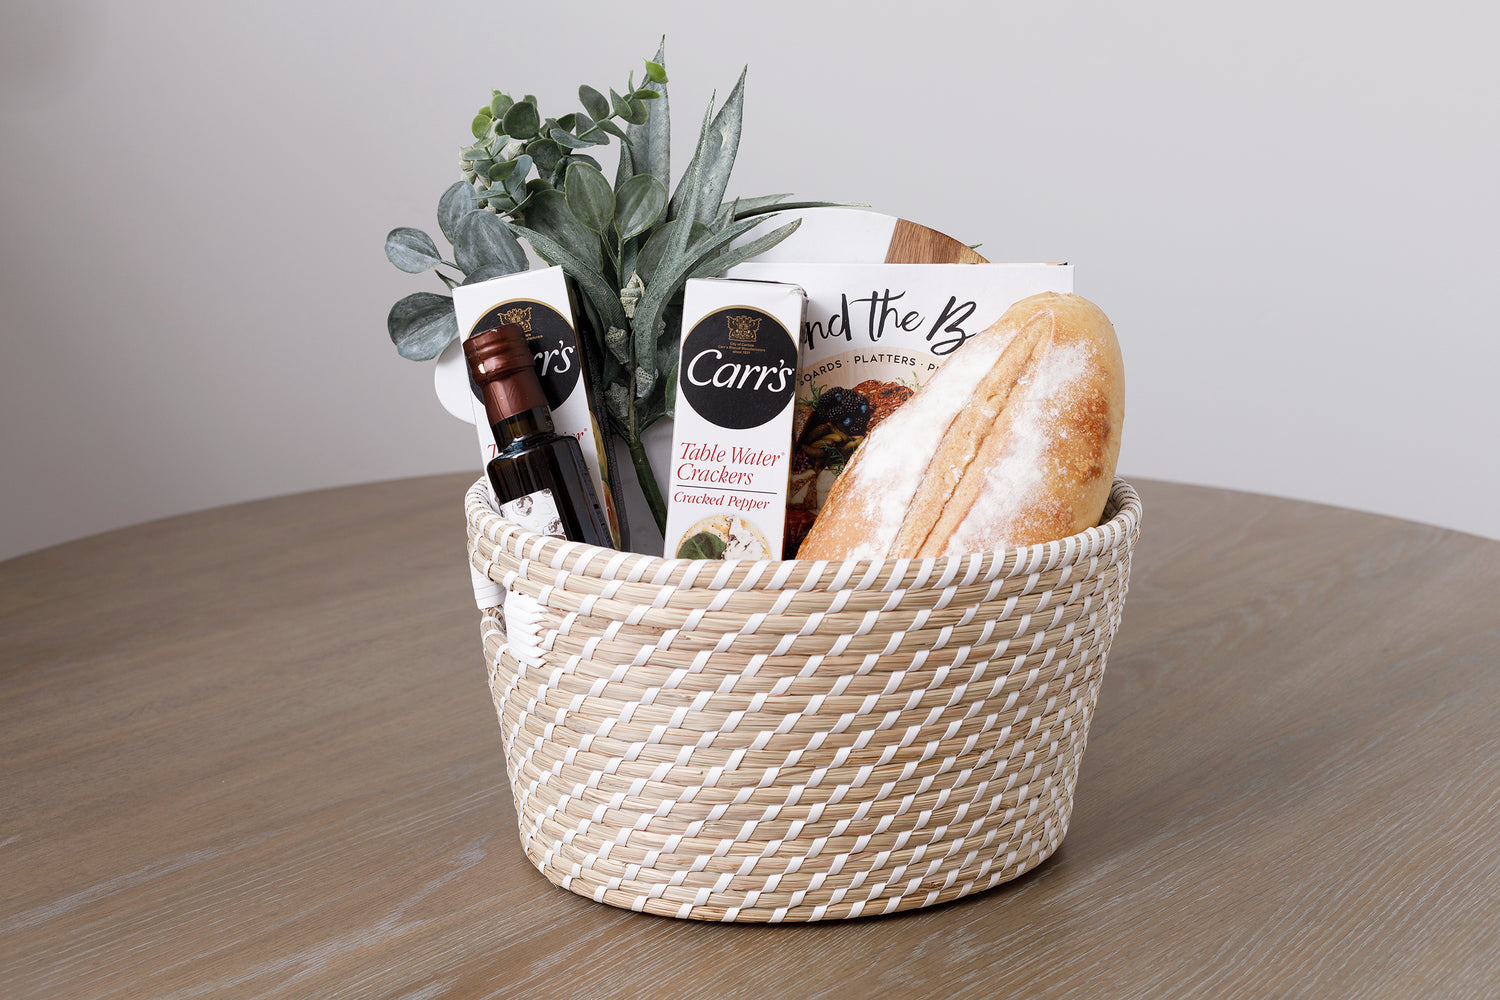 Neutral-toned White Haven basket filled with goodies including fresh bread, olive oil and a cookbook.